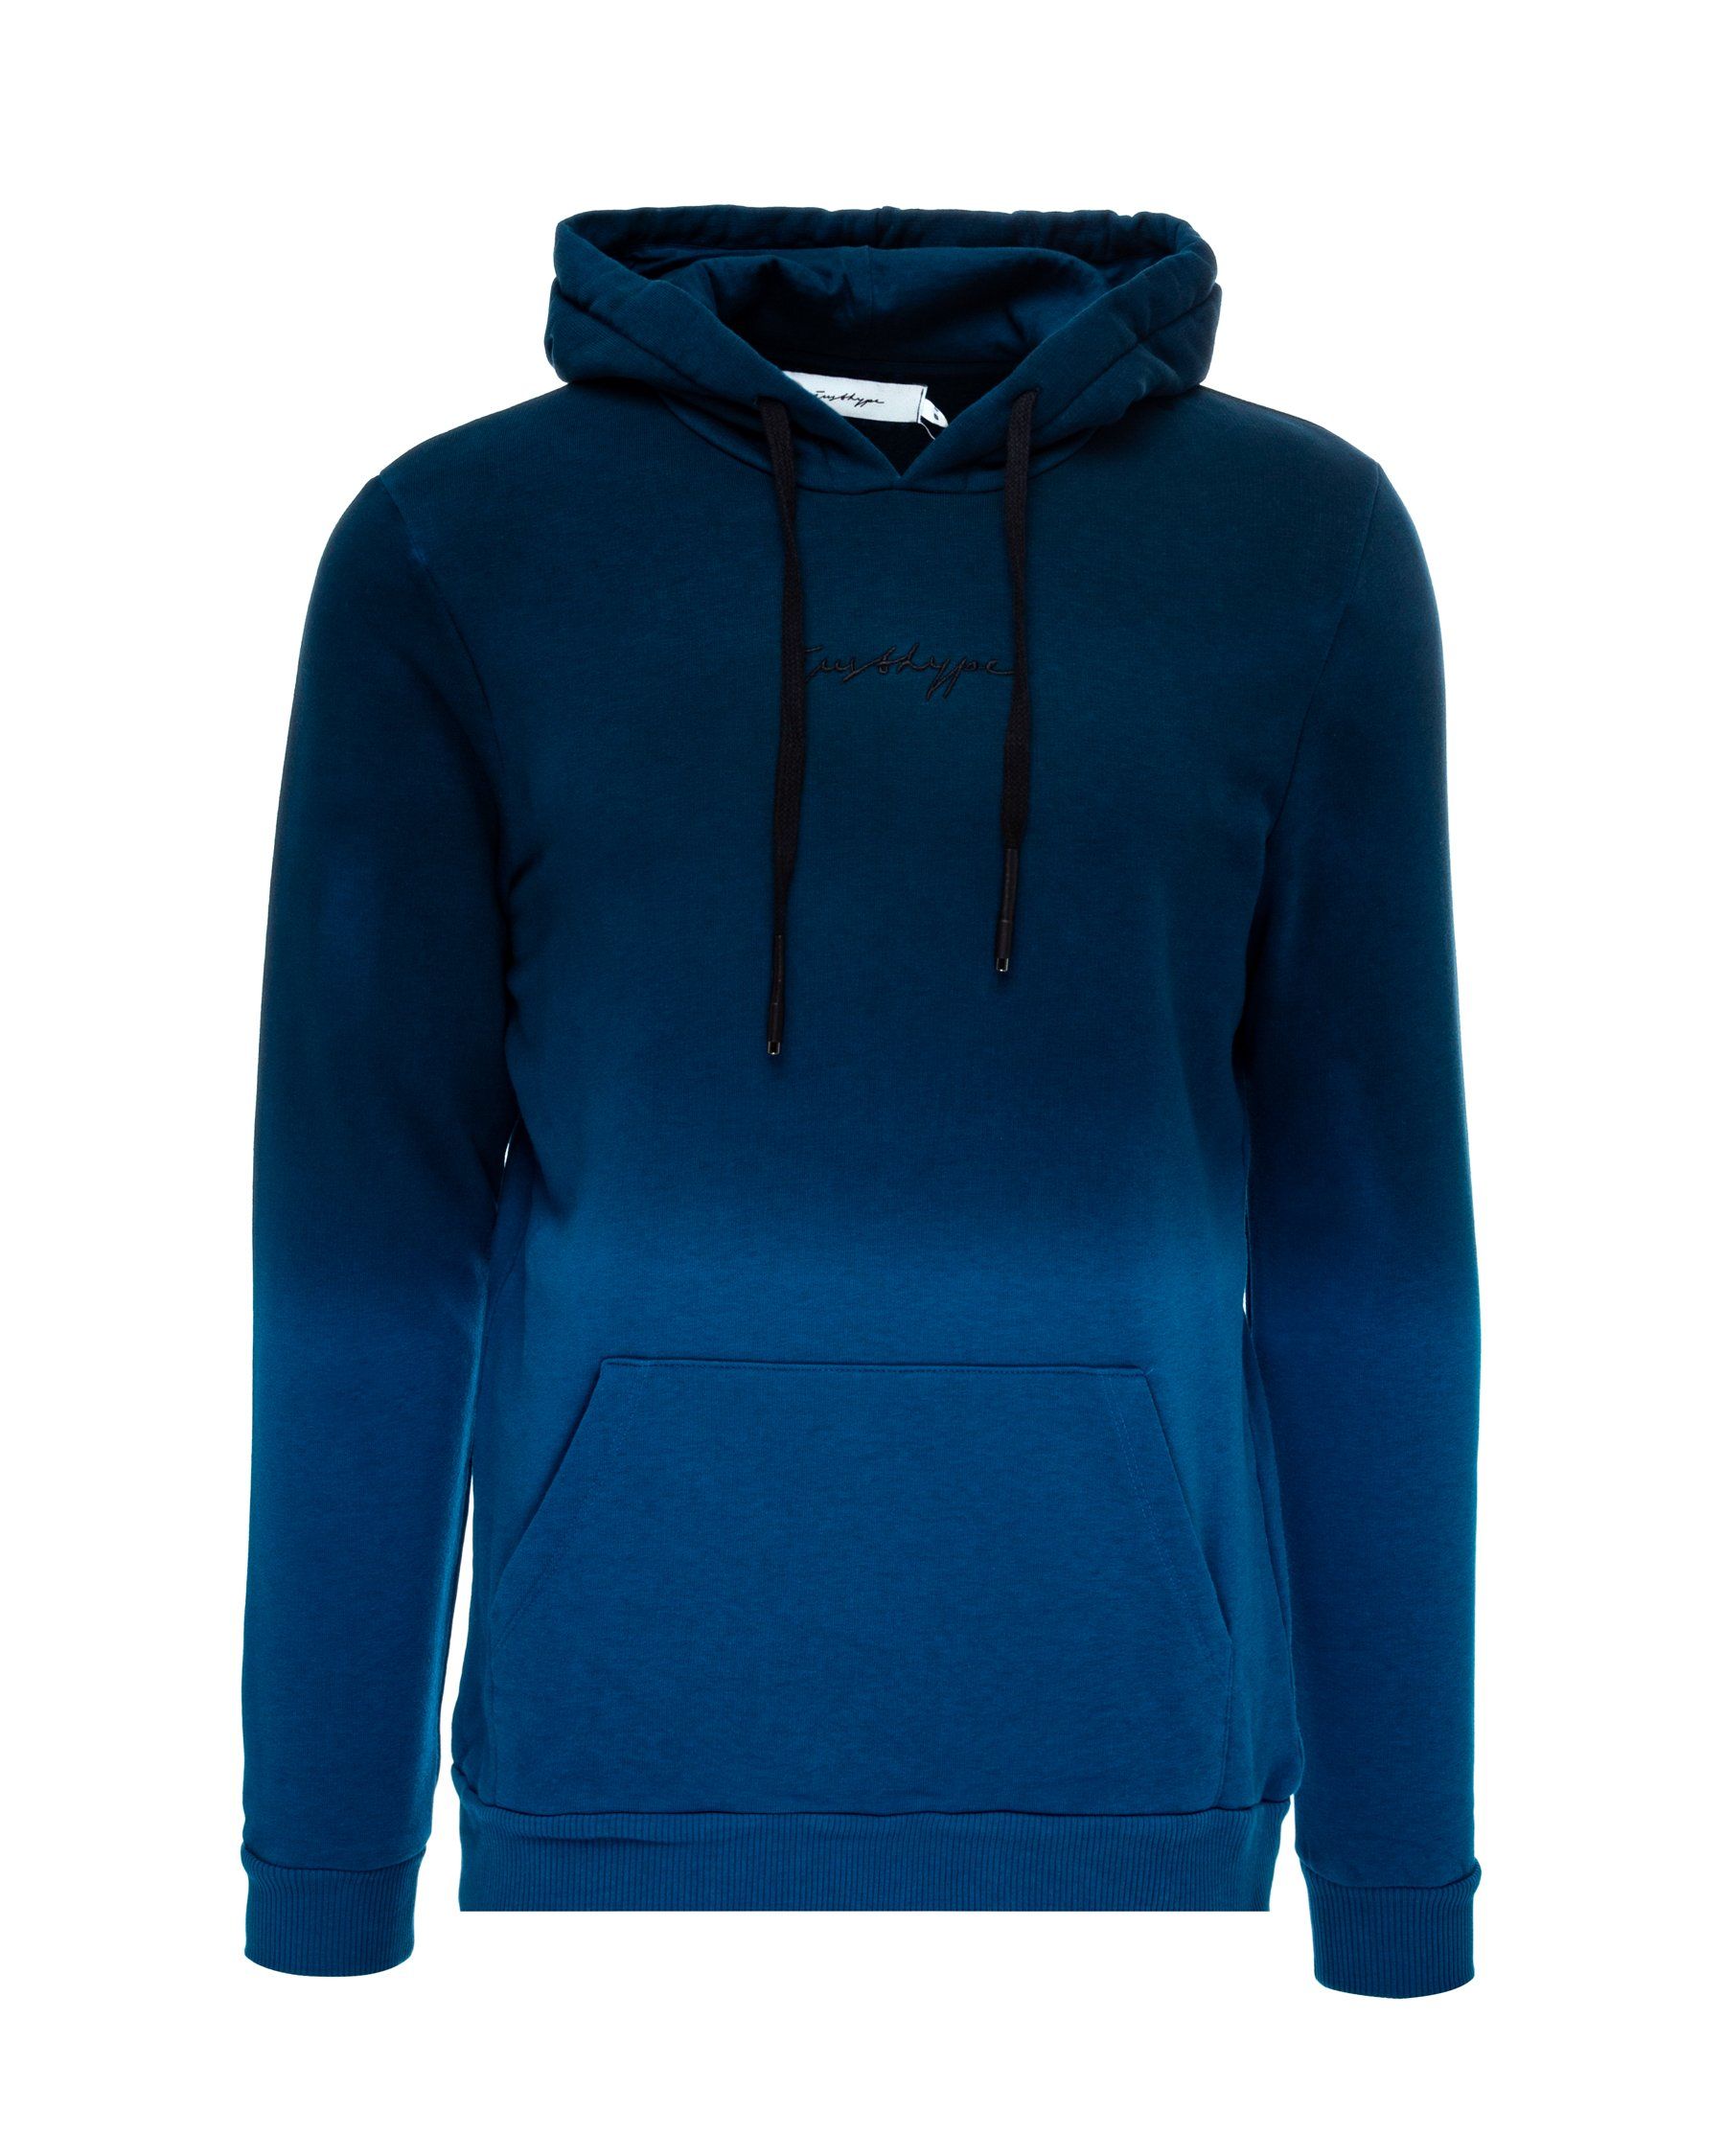 The HYPE. Blue Fade Men's Pullover Hoodie is your new go-to everyday essential. Designed in our standard men's hoodie shape, with a fixed hoot, kangaroo pocket and fitted hem and cuffs. With a 80% cotton and 20% polyester fabric base for supreme comfort and breathable space. With our signature all-over gradient fade effect in a light blue and navy colour palette. Finished with the new! embroidered just hype signature logo embroidered on the front in a contrasting black. Wear with black skinny fit jeans for a smart casual look. Machine washable.